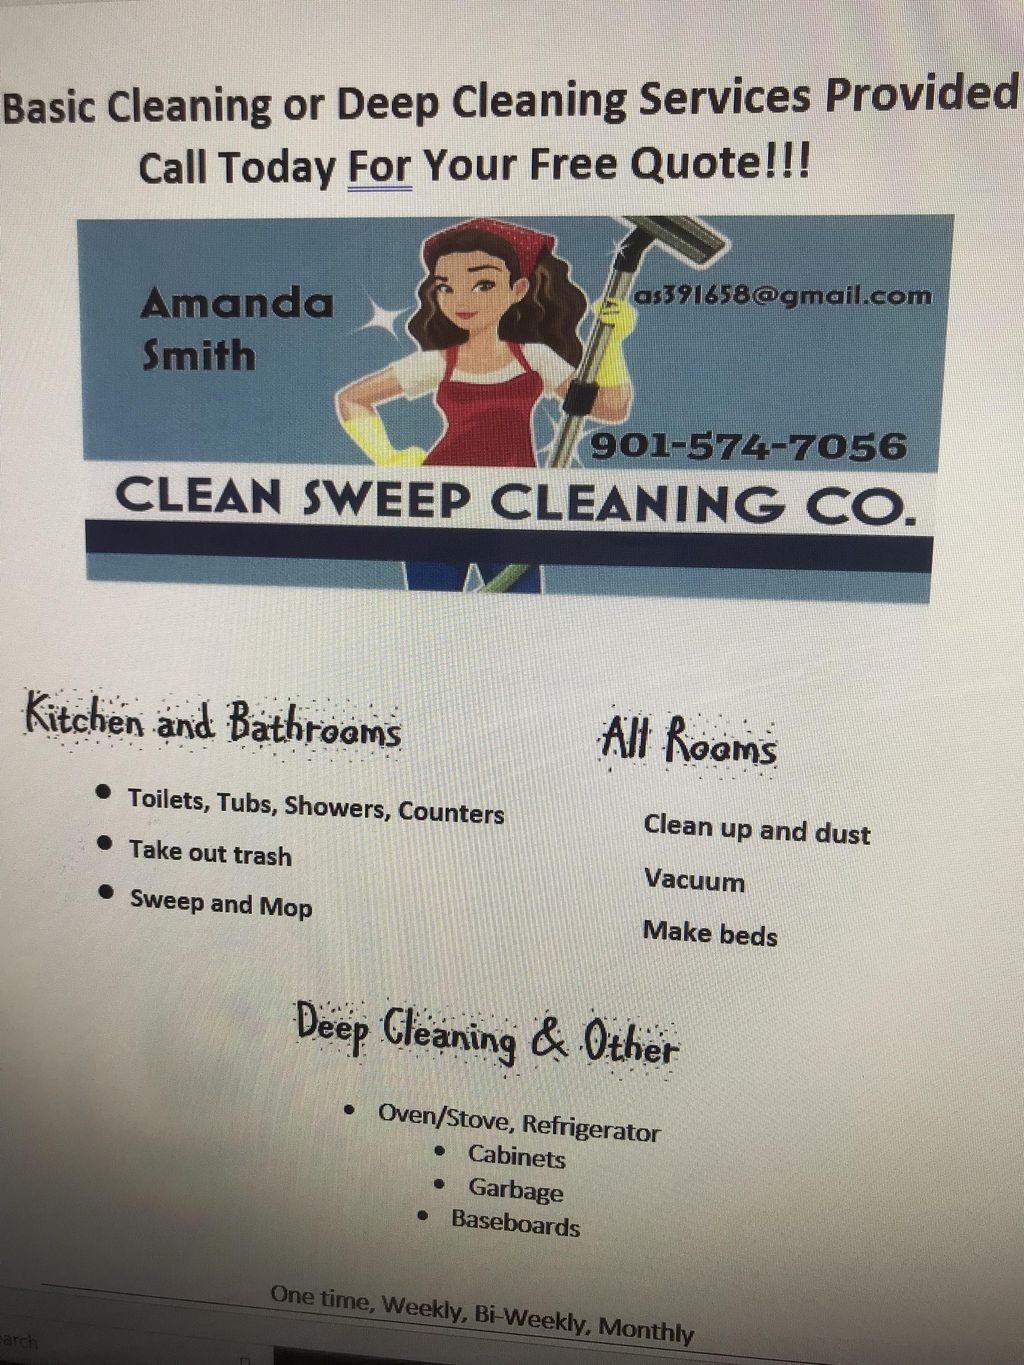 Clean Sweep Cleaning Co.